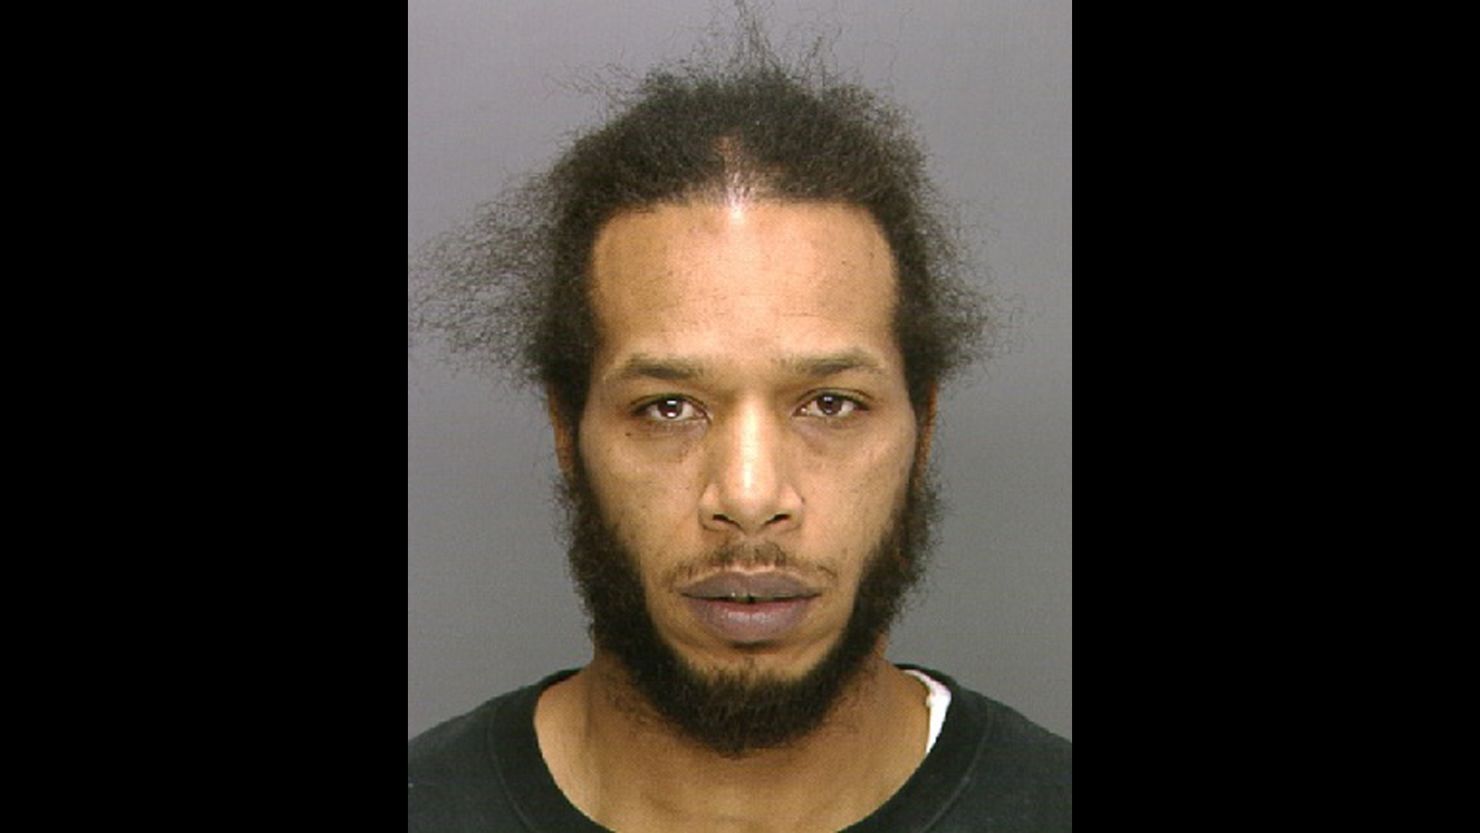 William Clark has been held by Philadelphia Police after allegedly attacking a woman in a subway station.